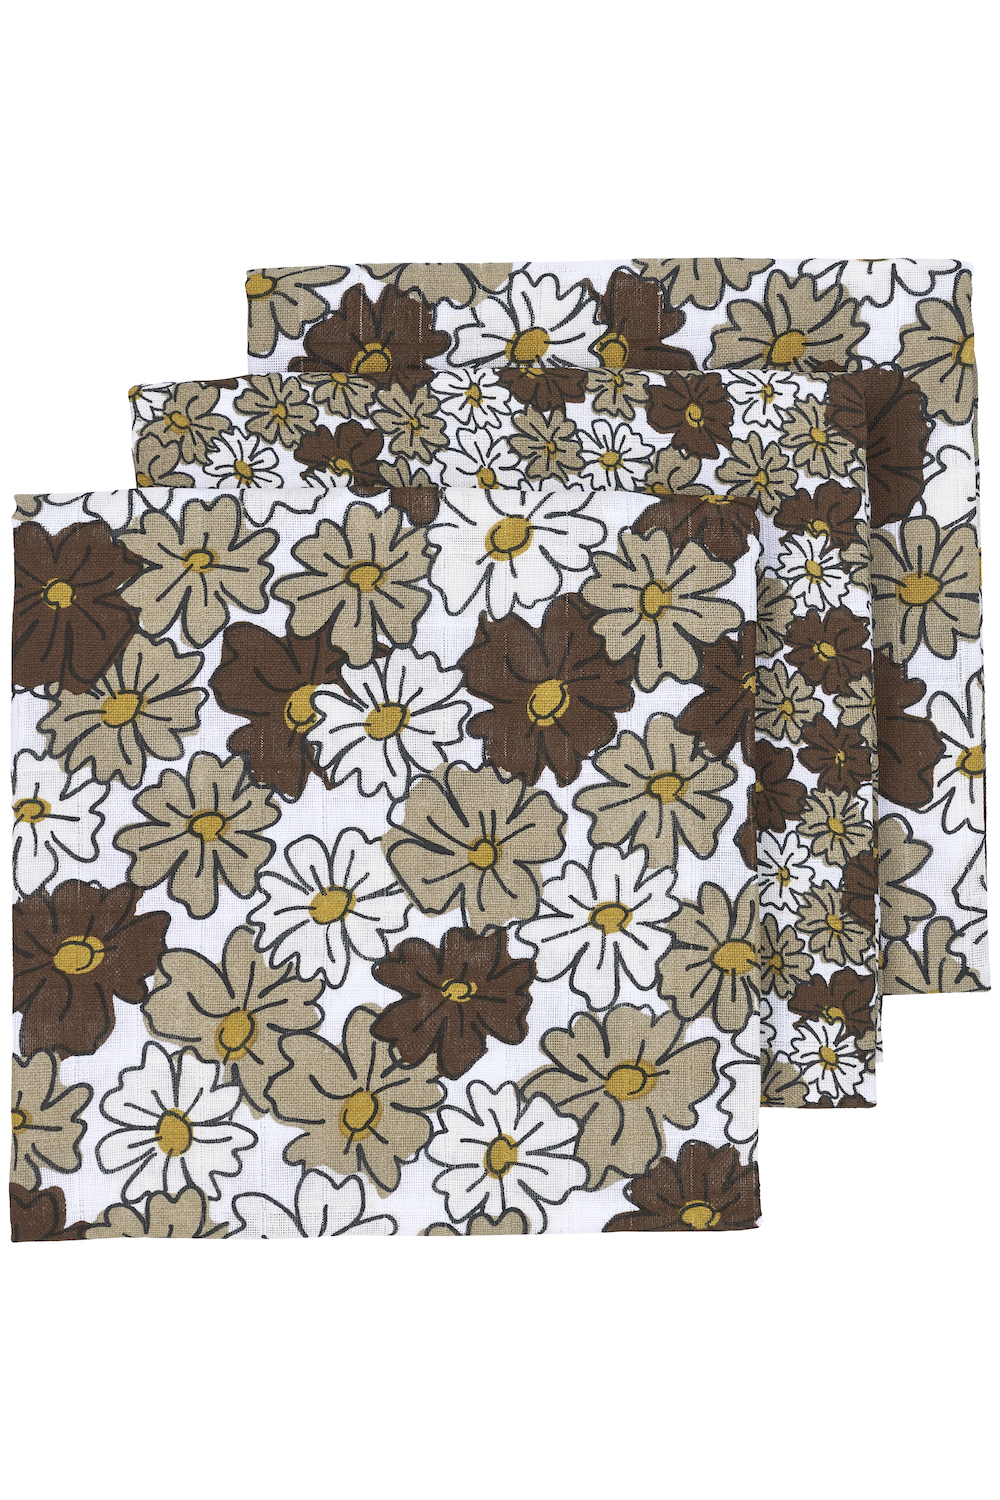 Musselin Mullwindeln 3-pack Vintage Flower - Taupe - 70x70cm